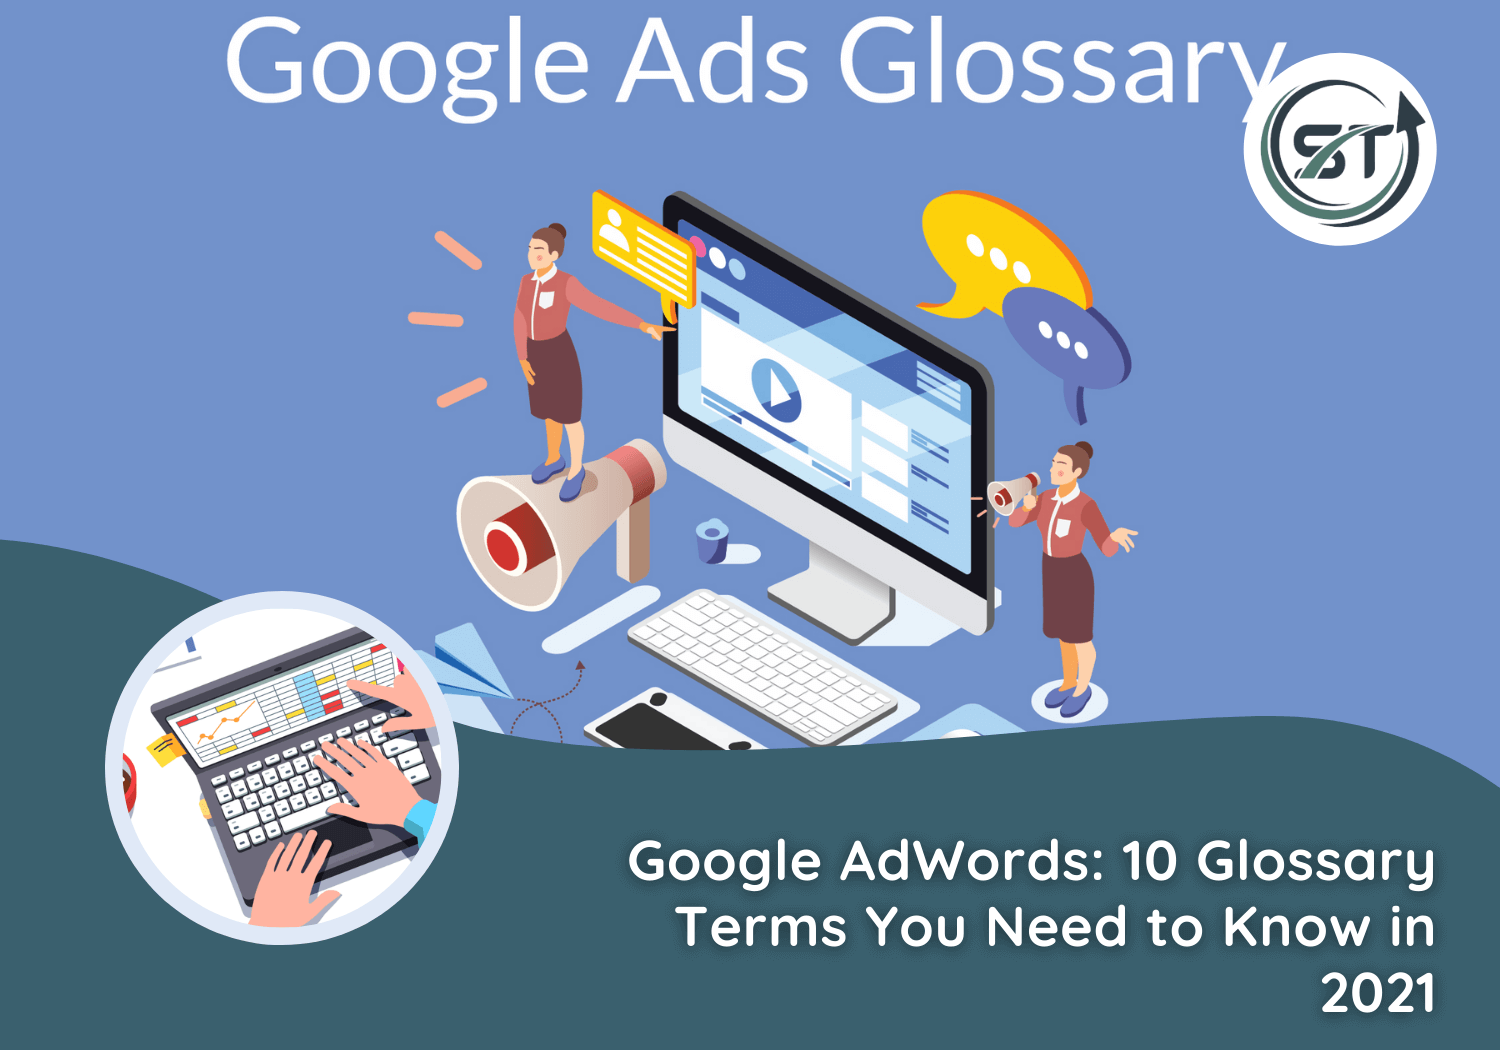 Google AdWords: 10 Glossary Terms You Need to Know in 2021